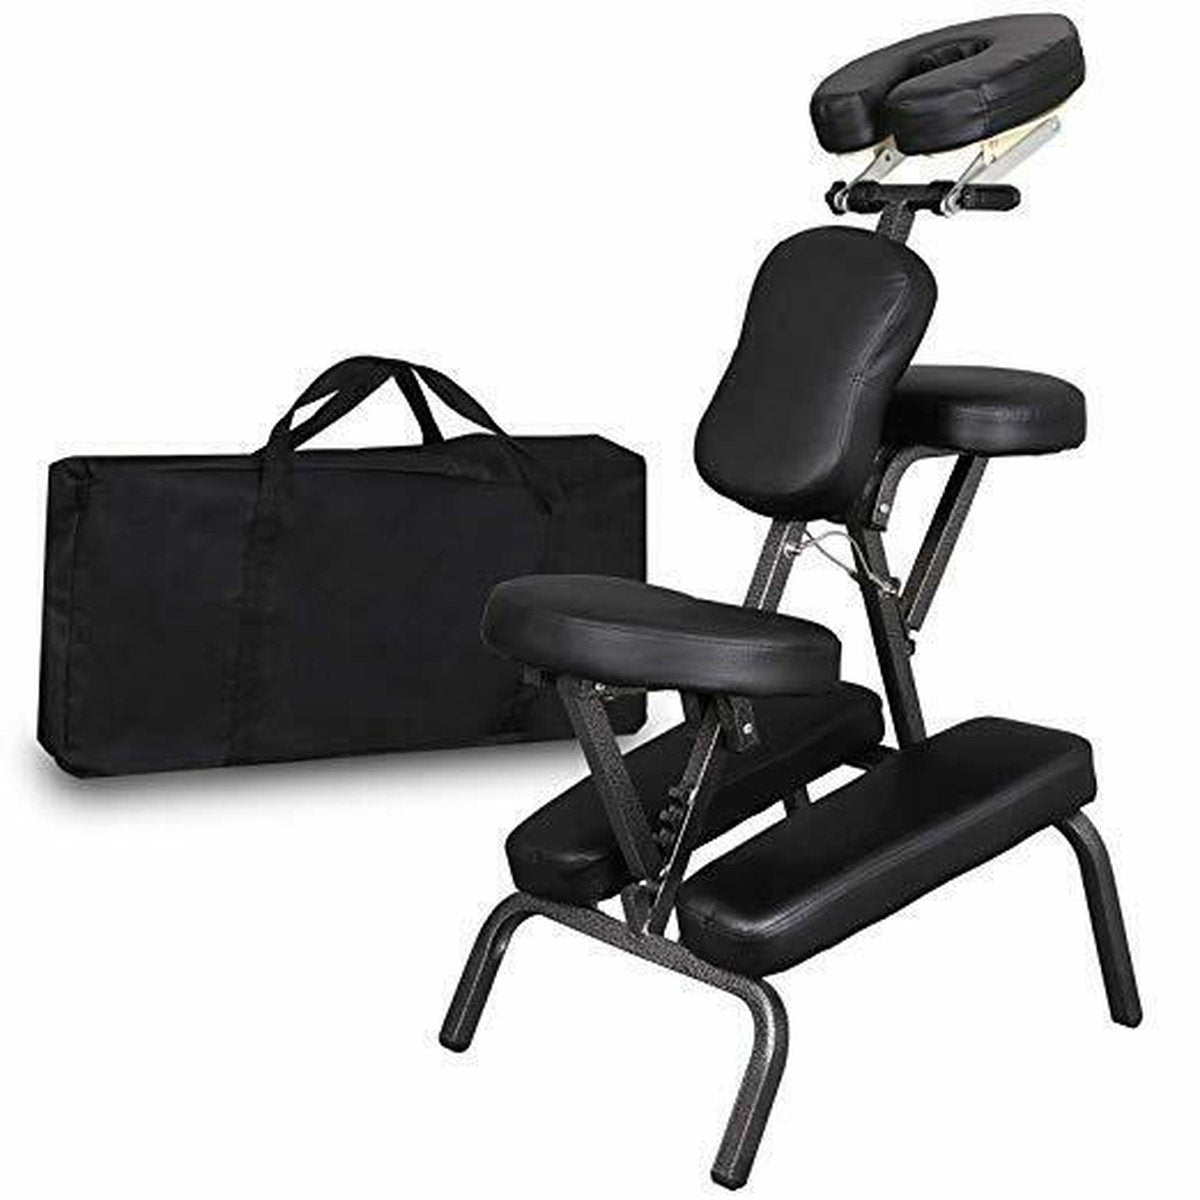 SMAXPRO™ Adjustable Folding Leather Massage Chair: Salon/Tattoo/Spa | Portable Travel Carry Case folding massage chair SMAXPRO™ 